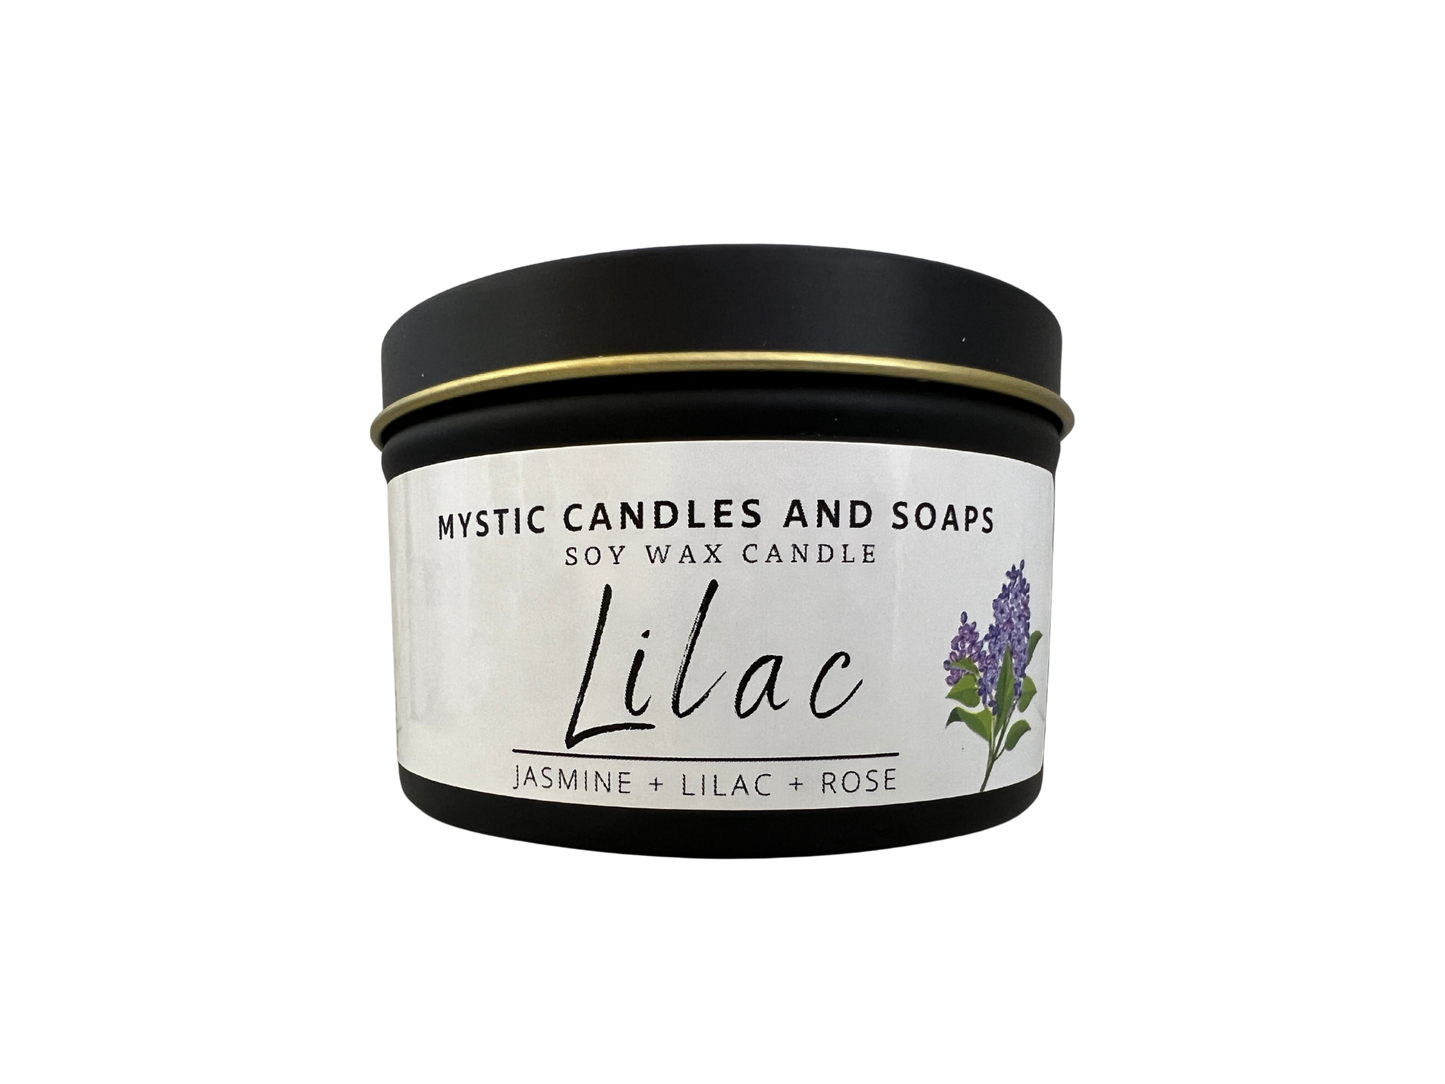 Lilac Flameless Candle - Mystic Candles and Soaps LLC